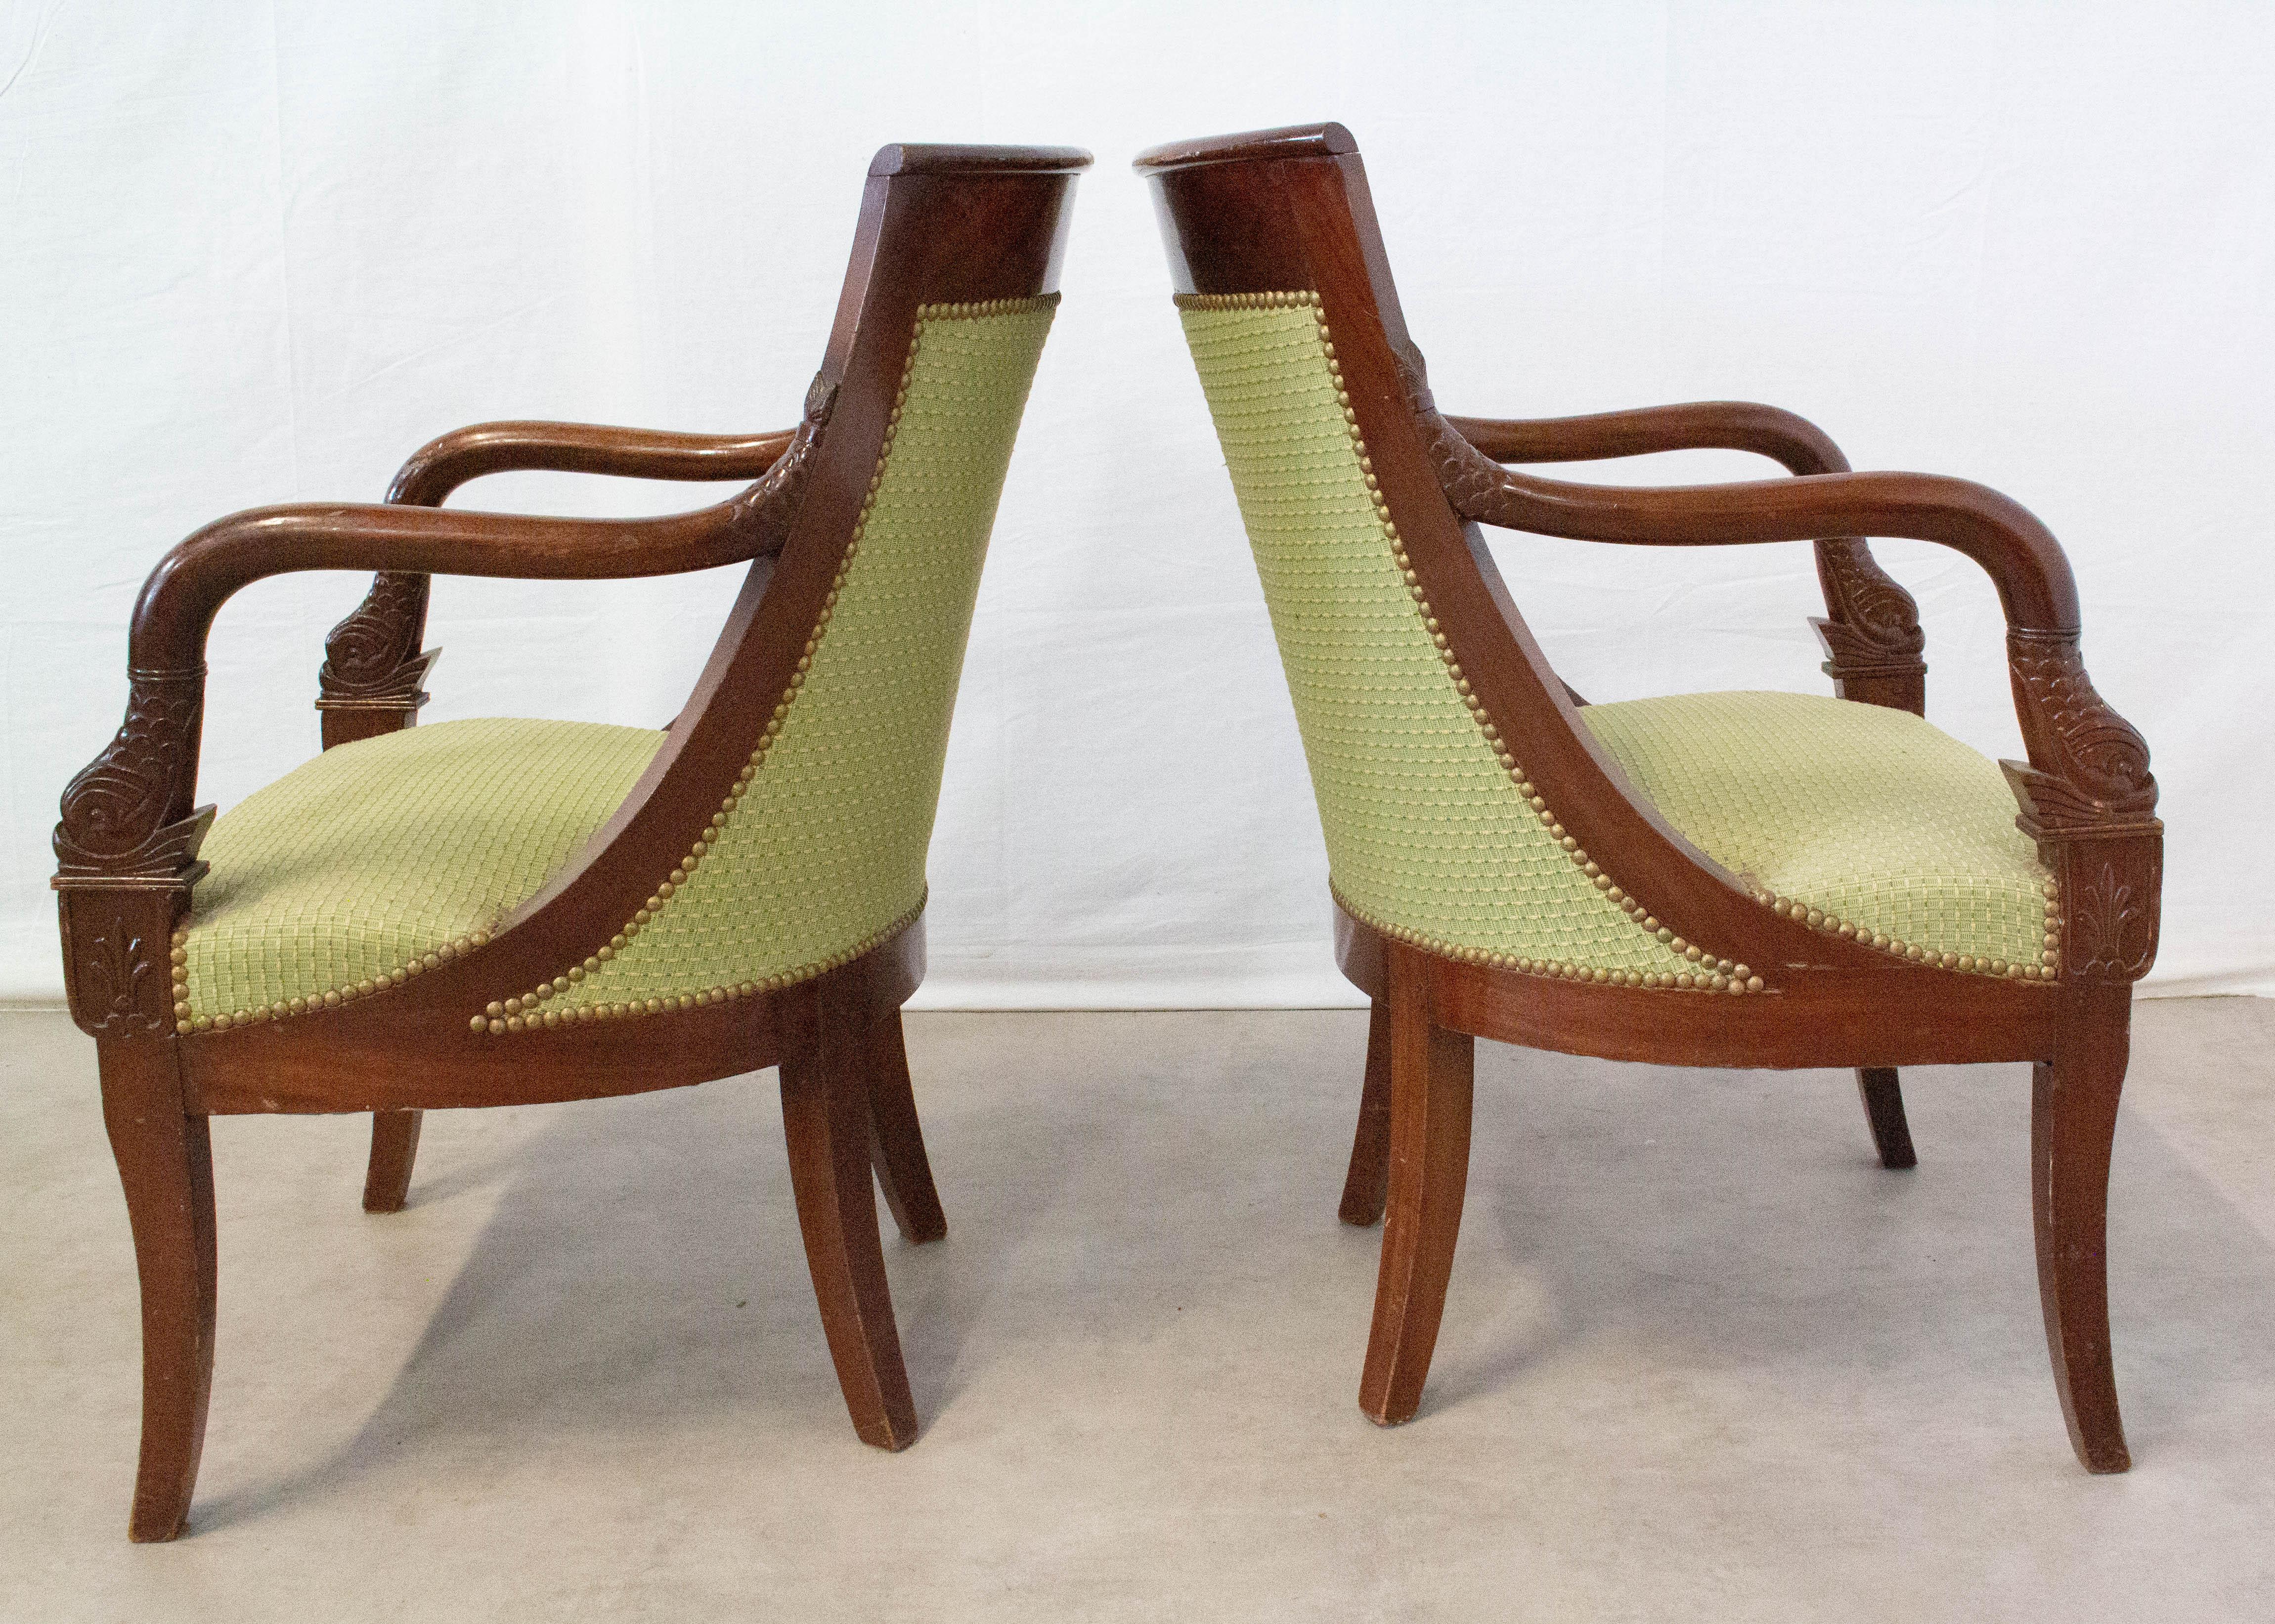 Pair of French Empire Revival open armchairs side or desk chairs,
early 20th century
The fabric can easily be changed to suit your interior
A few brands on varnish, please see photos.
Good vintage condition
Frames sound and solid.